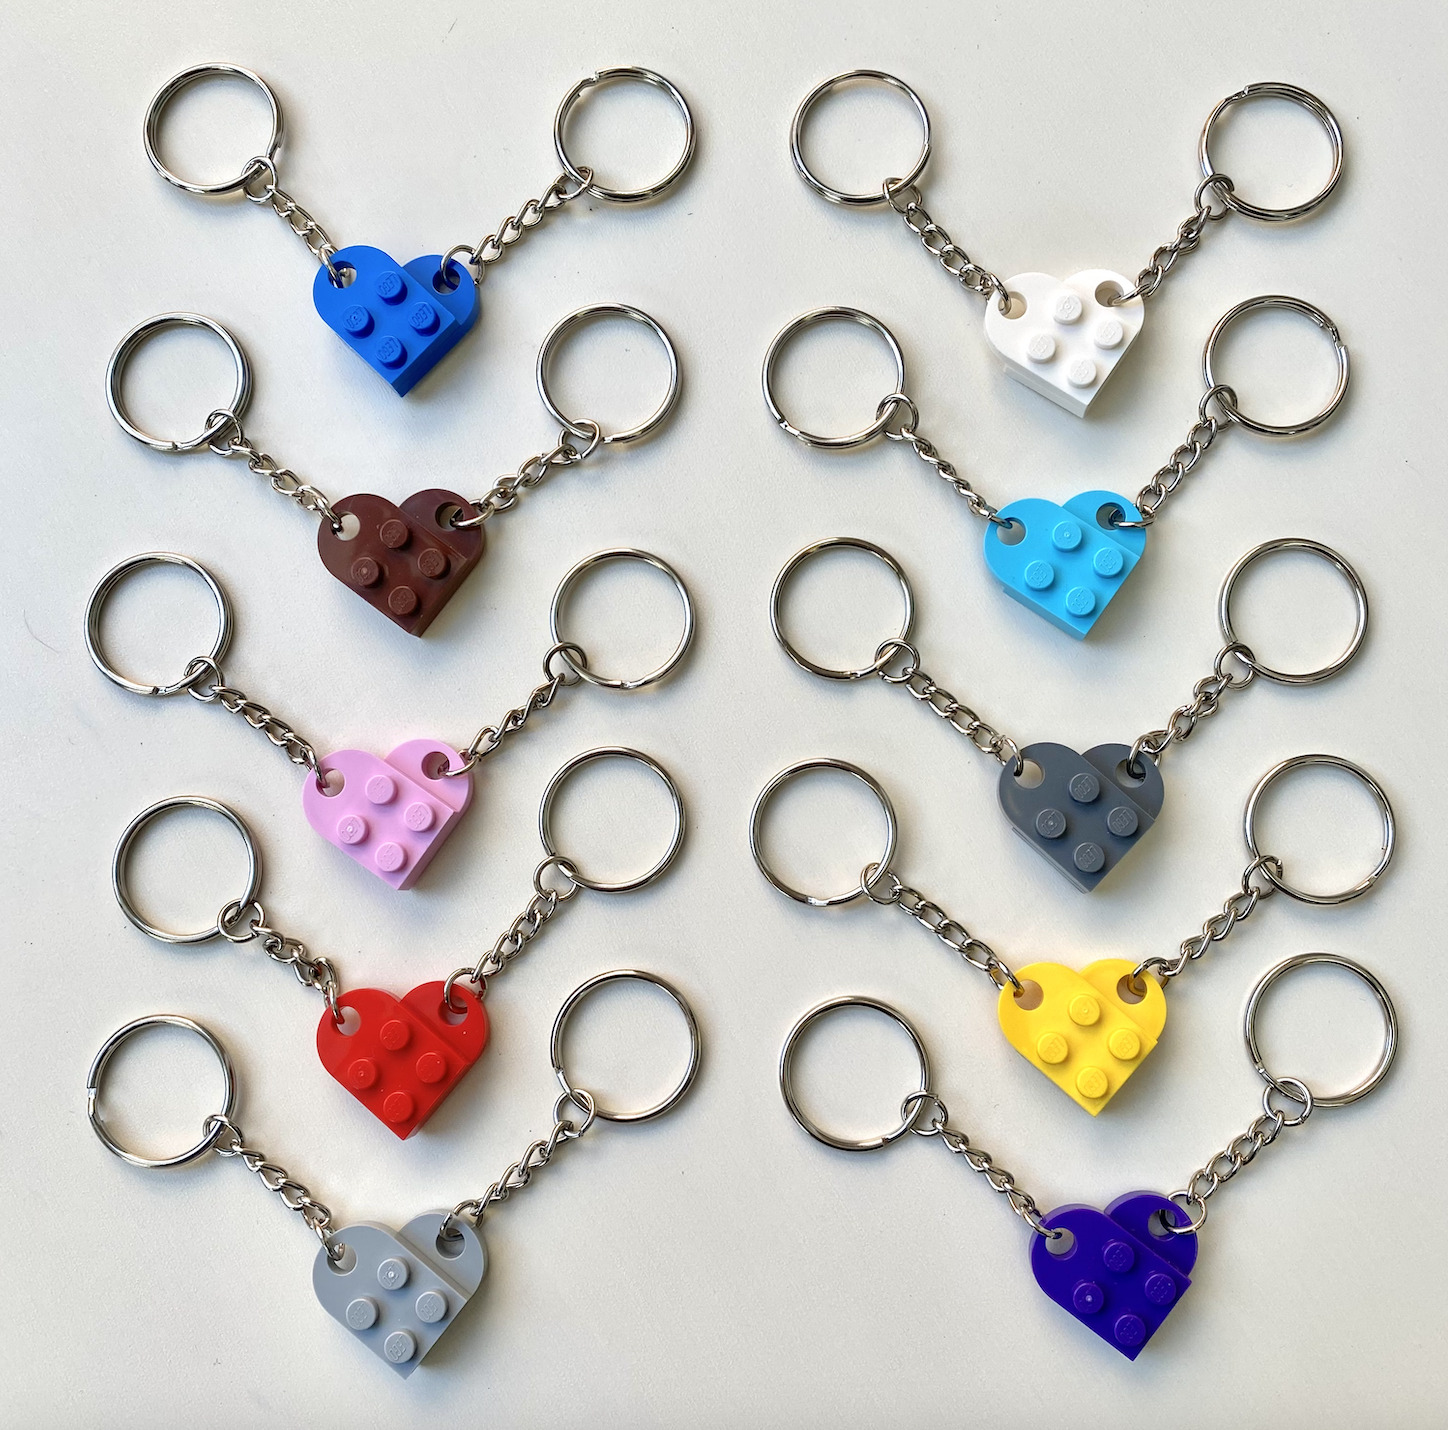 Lego Heart Key Chains & Heart Necklaces, Best Friend gift, Valentine gift, USA